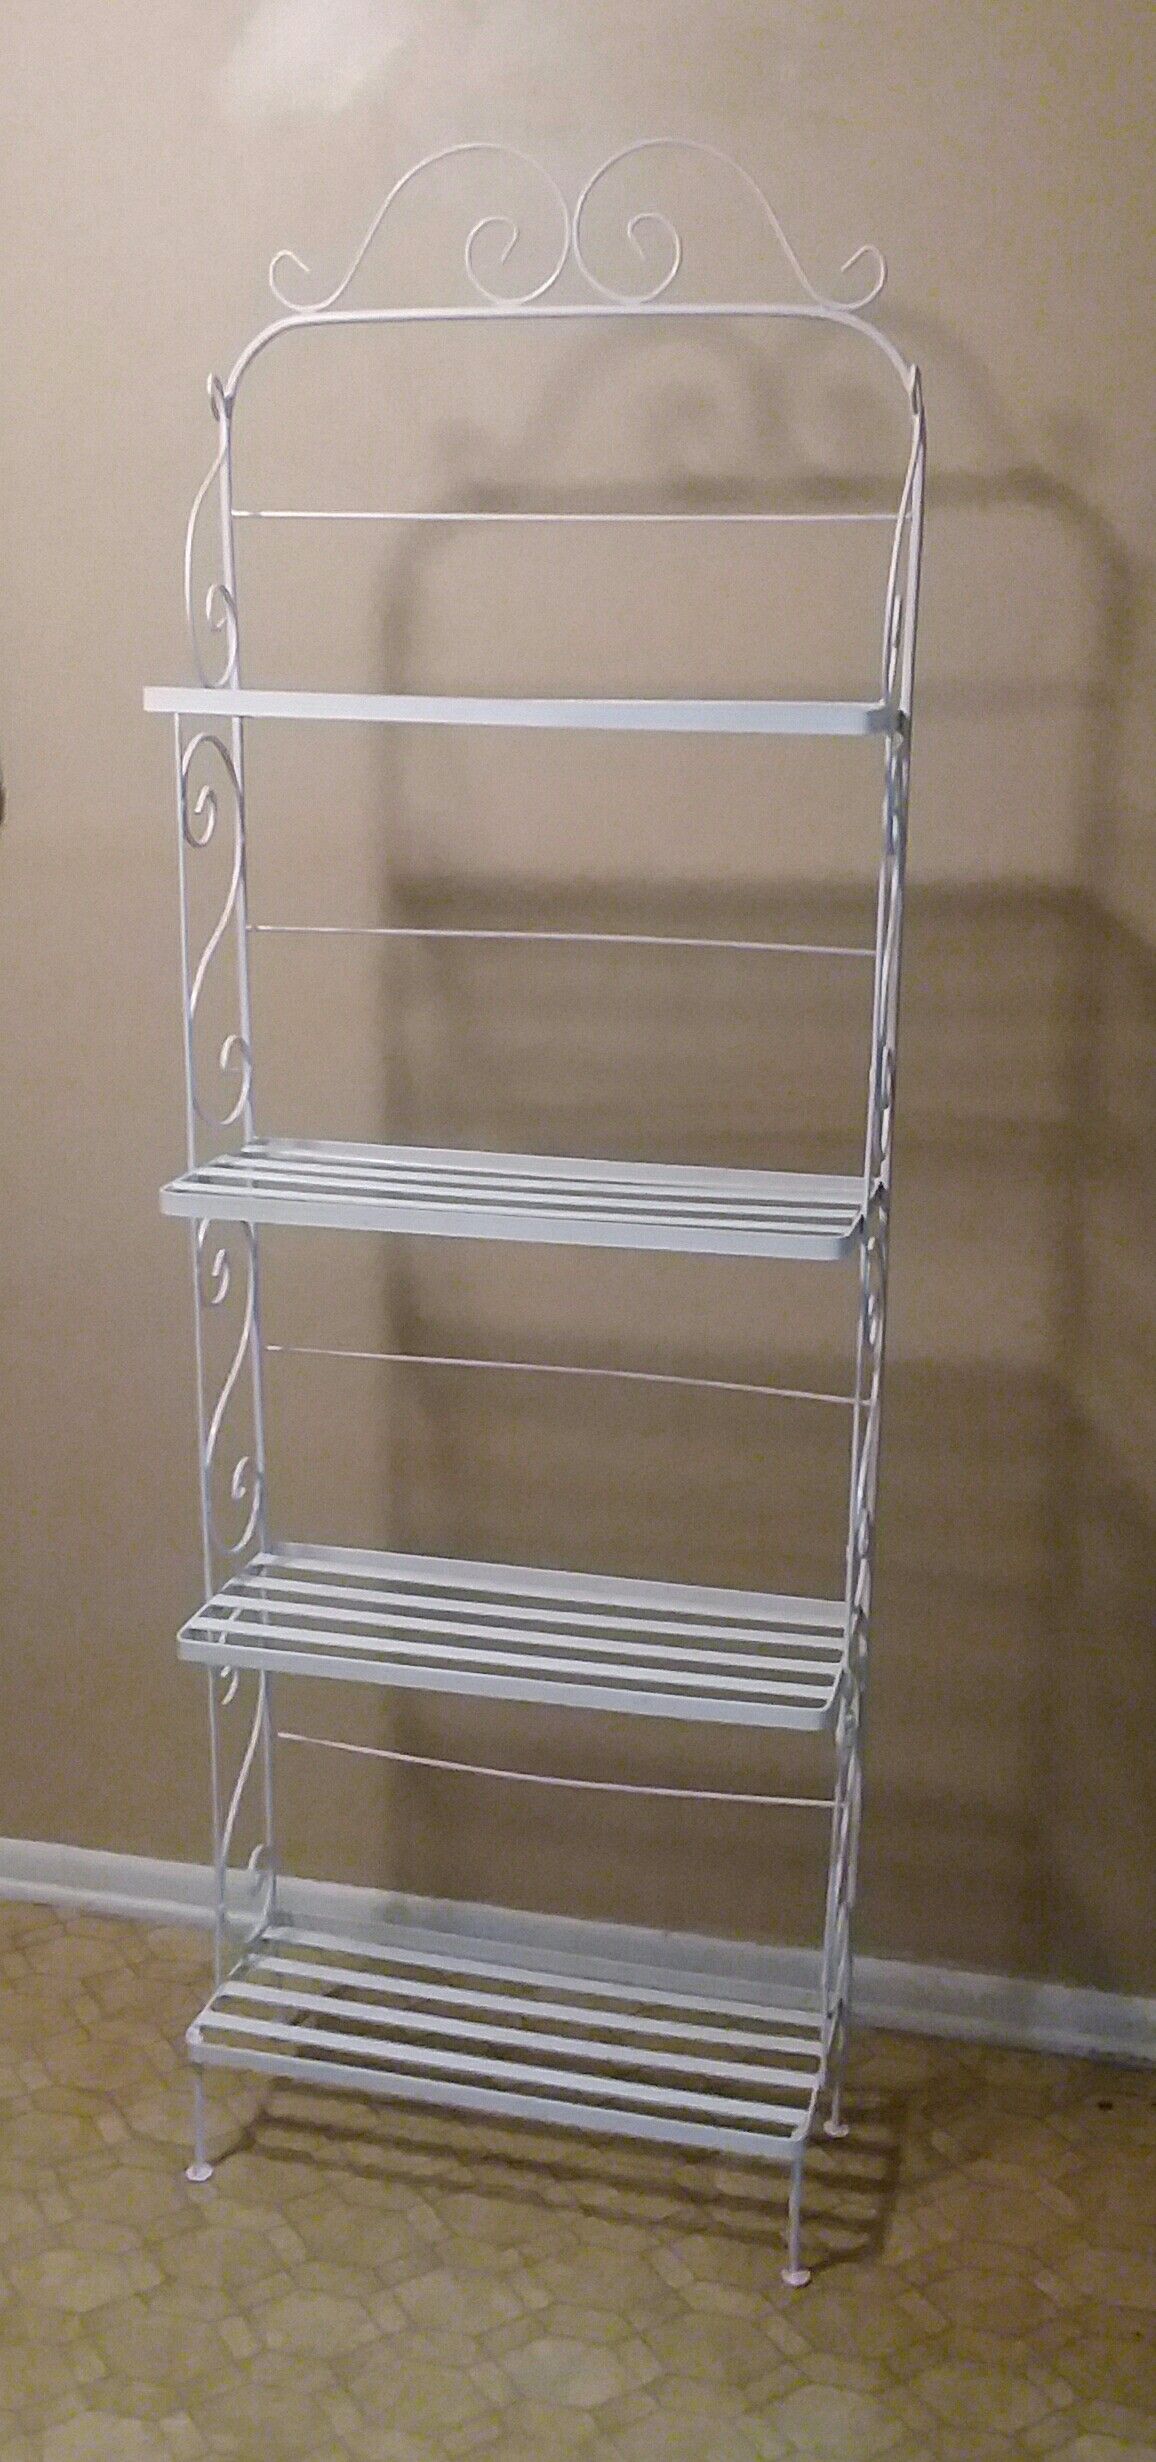 (Heavy Duty) Tall/Wrought iron Rack/Stand (Excellent Used Condition)